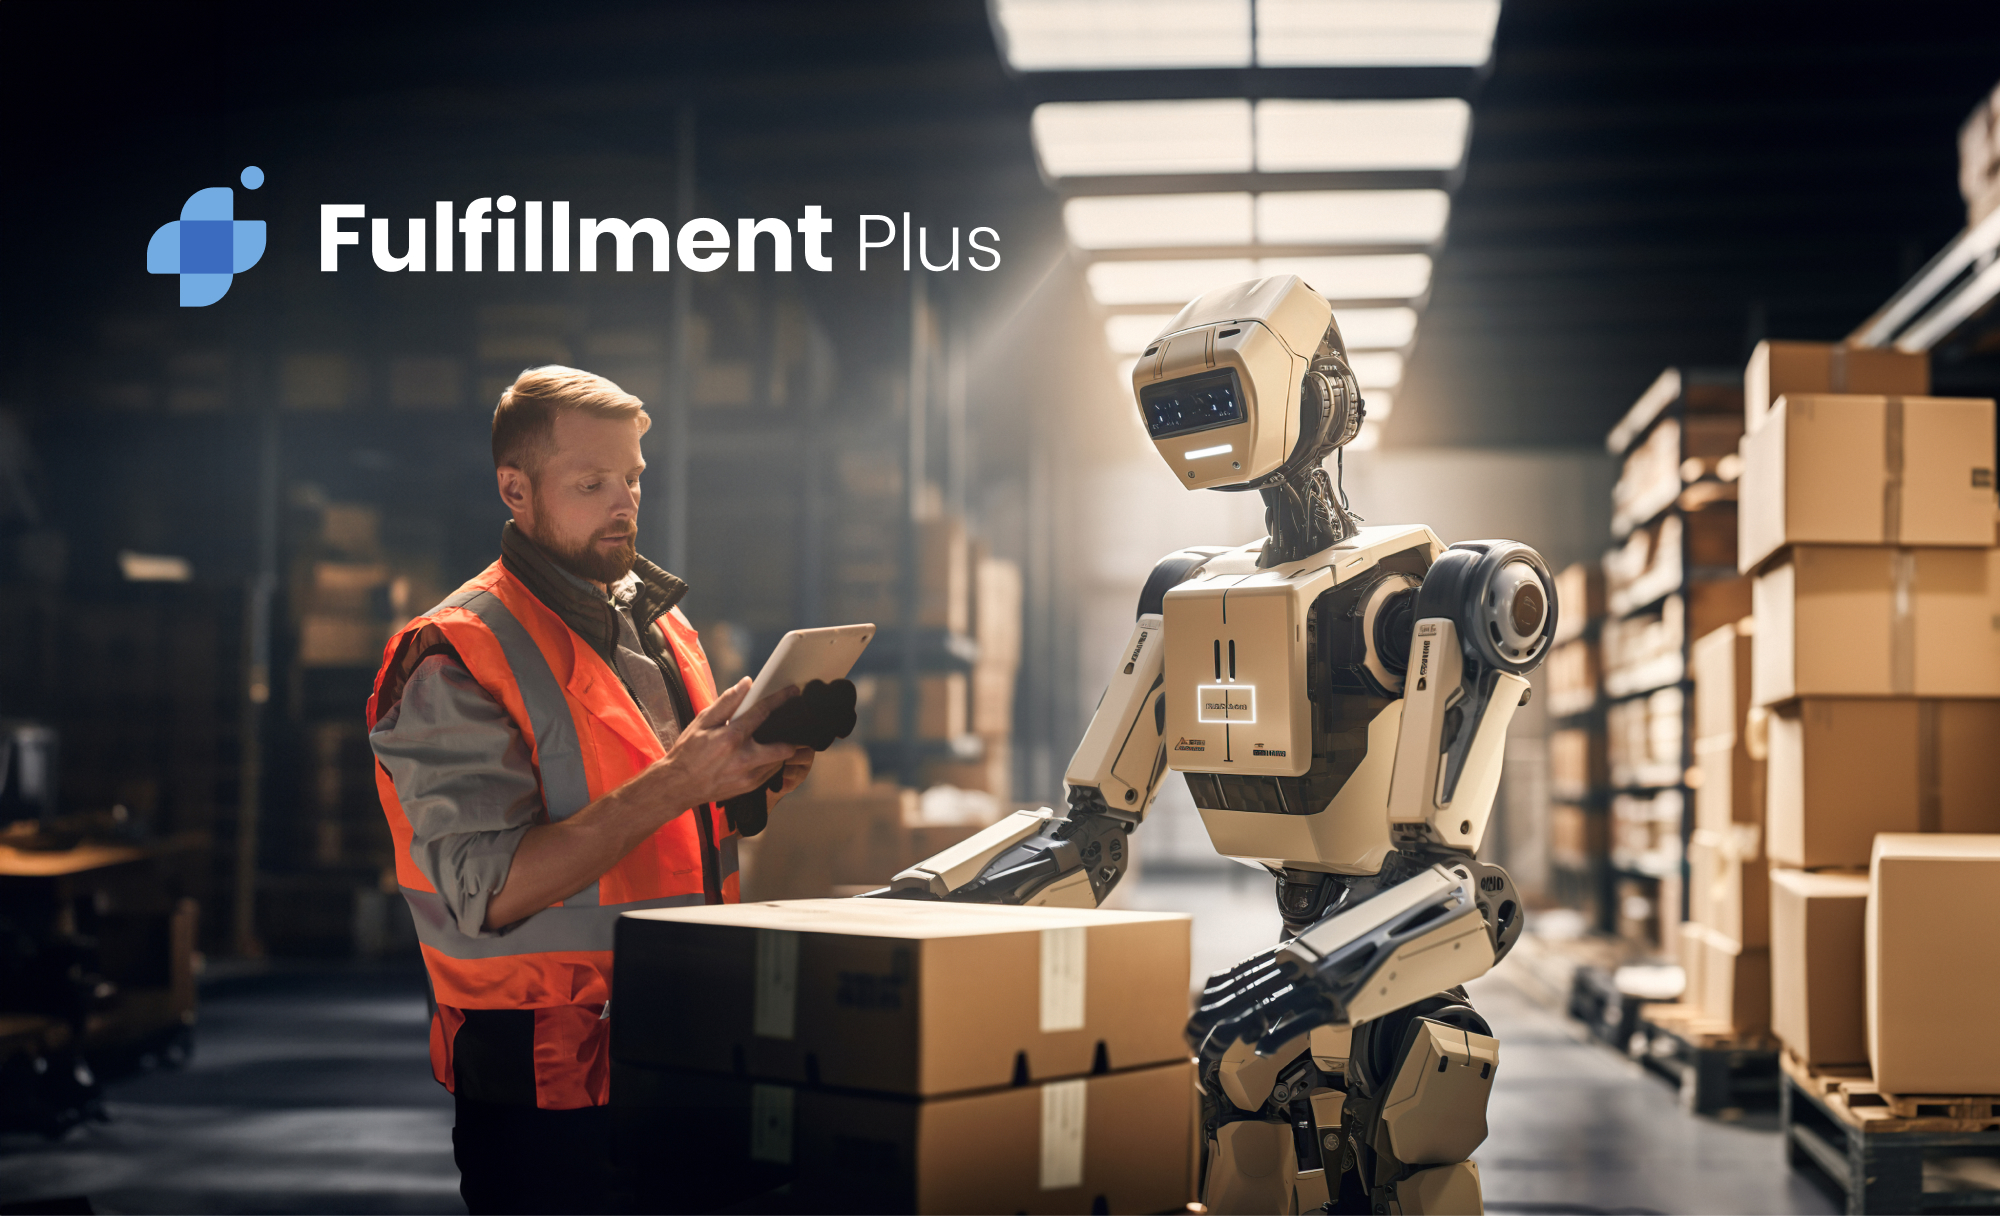 Future fulfillment centers won't be robot-run. Automation frees workers from higher-level tasks, boosting efficiency, job satisfaction, and the irreplaceable human touch